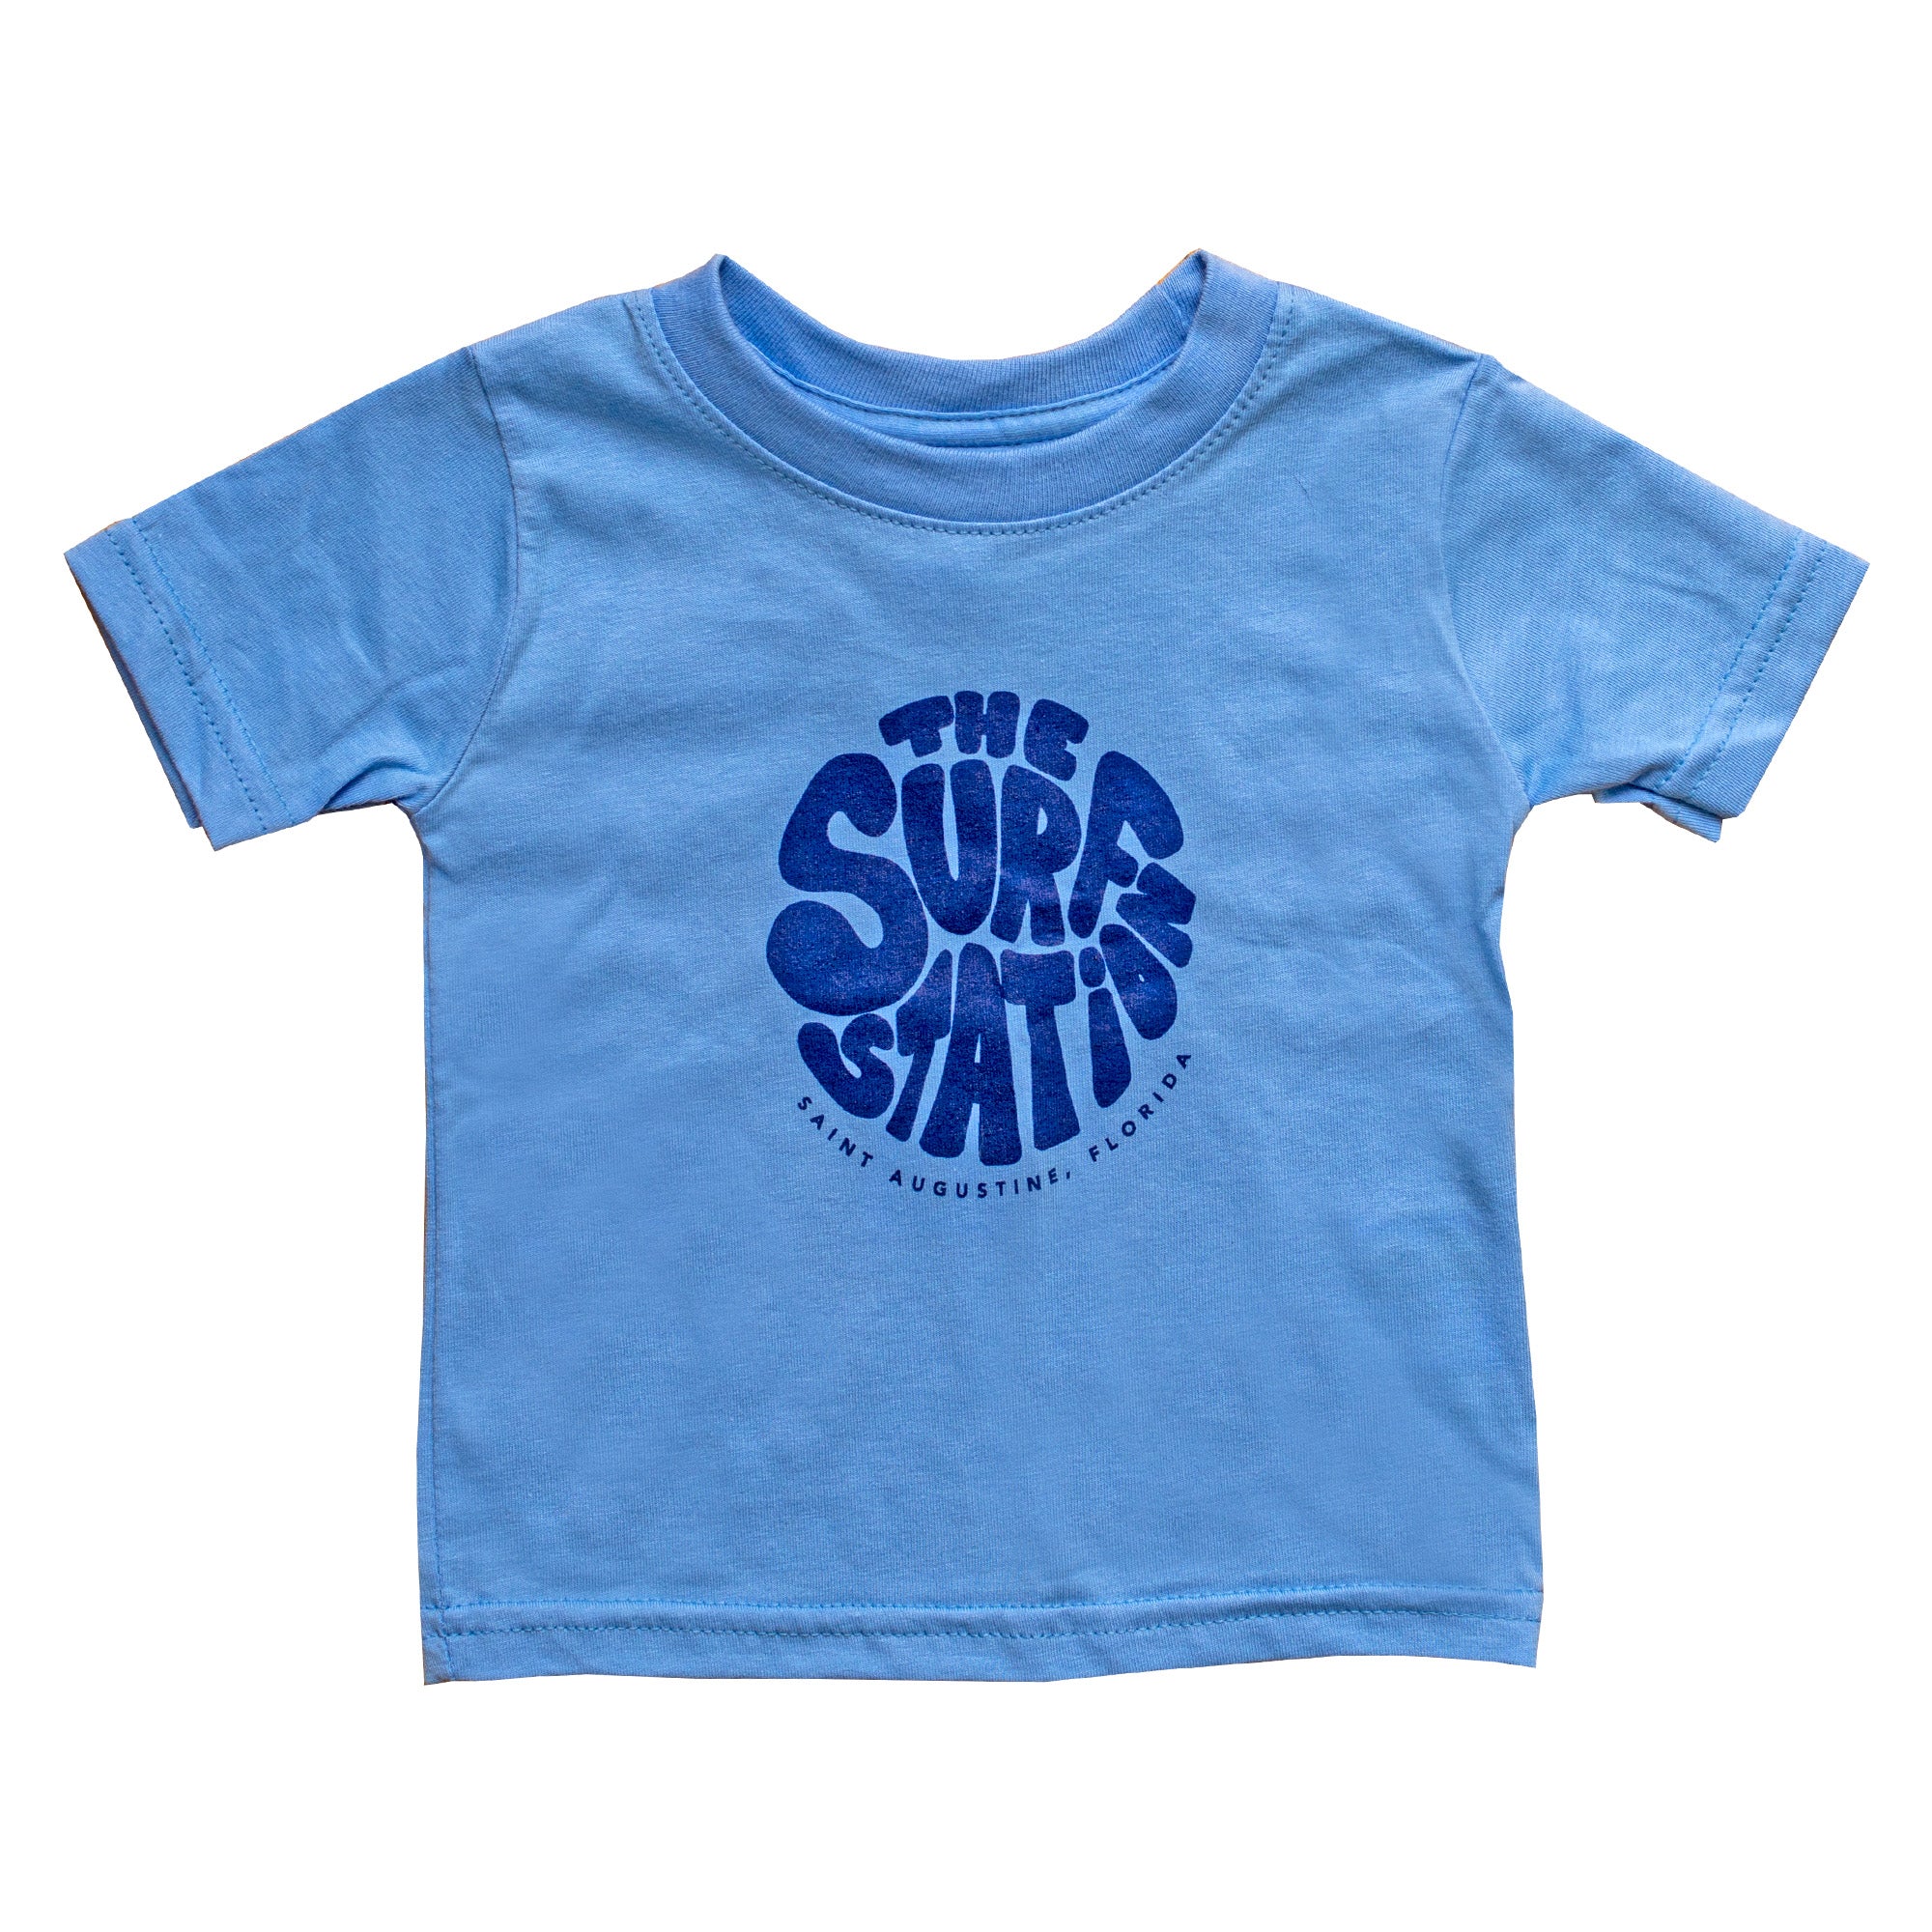 Surf Station Little Hippie Youth S/S T-Shirt